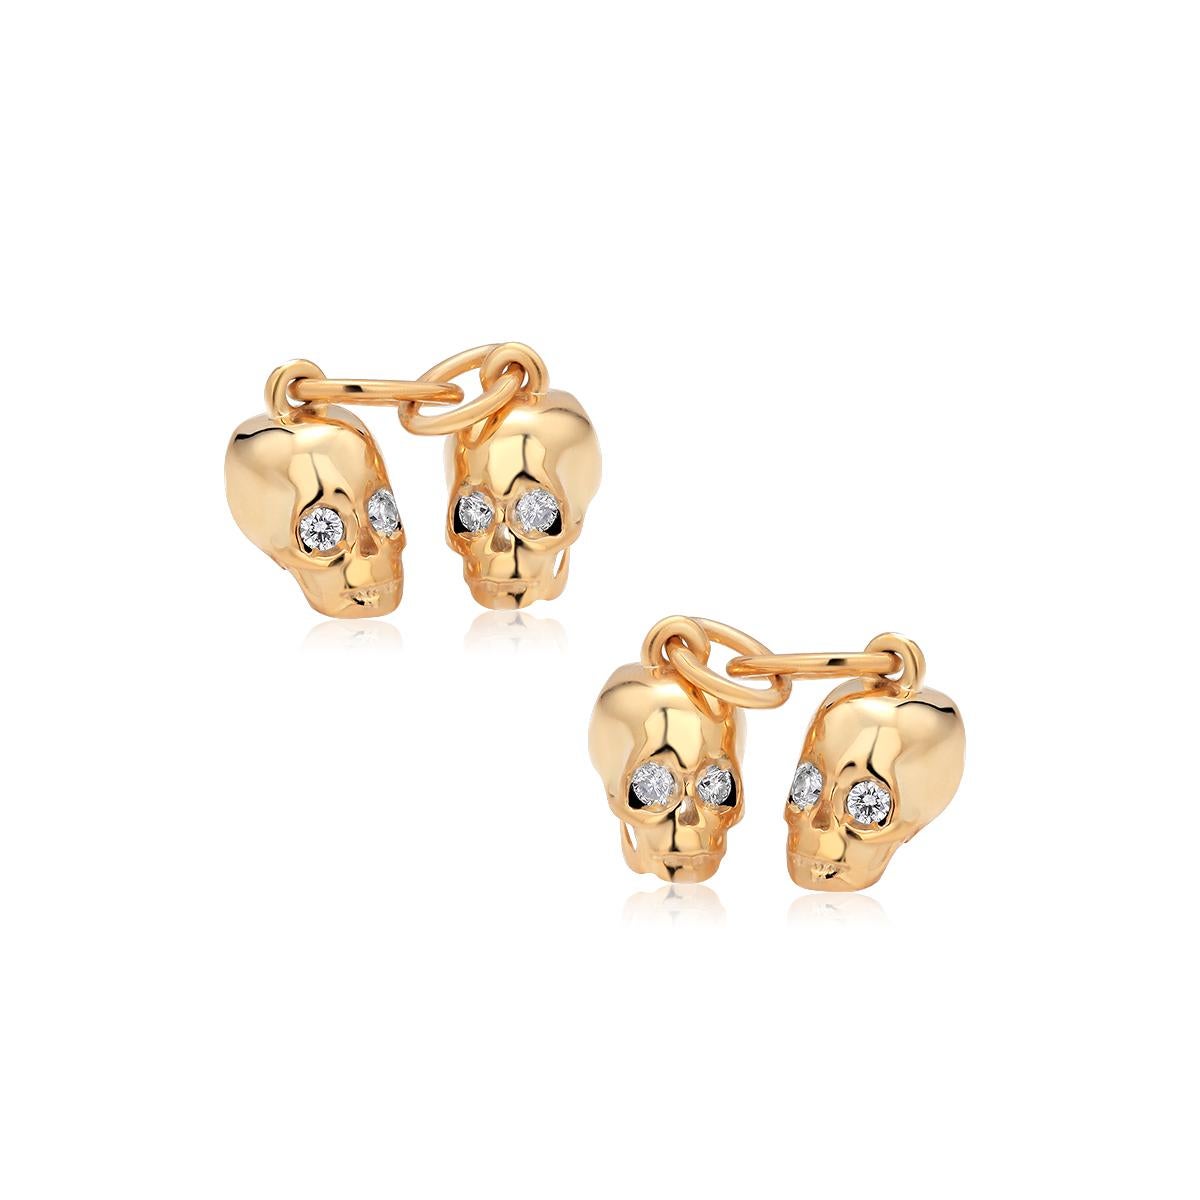 Round Cut Genuine Diamond Skull Charms Double Sided Silver Cufflinks Yellow Gold-Plated